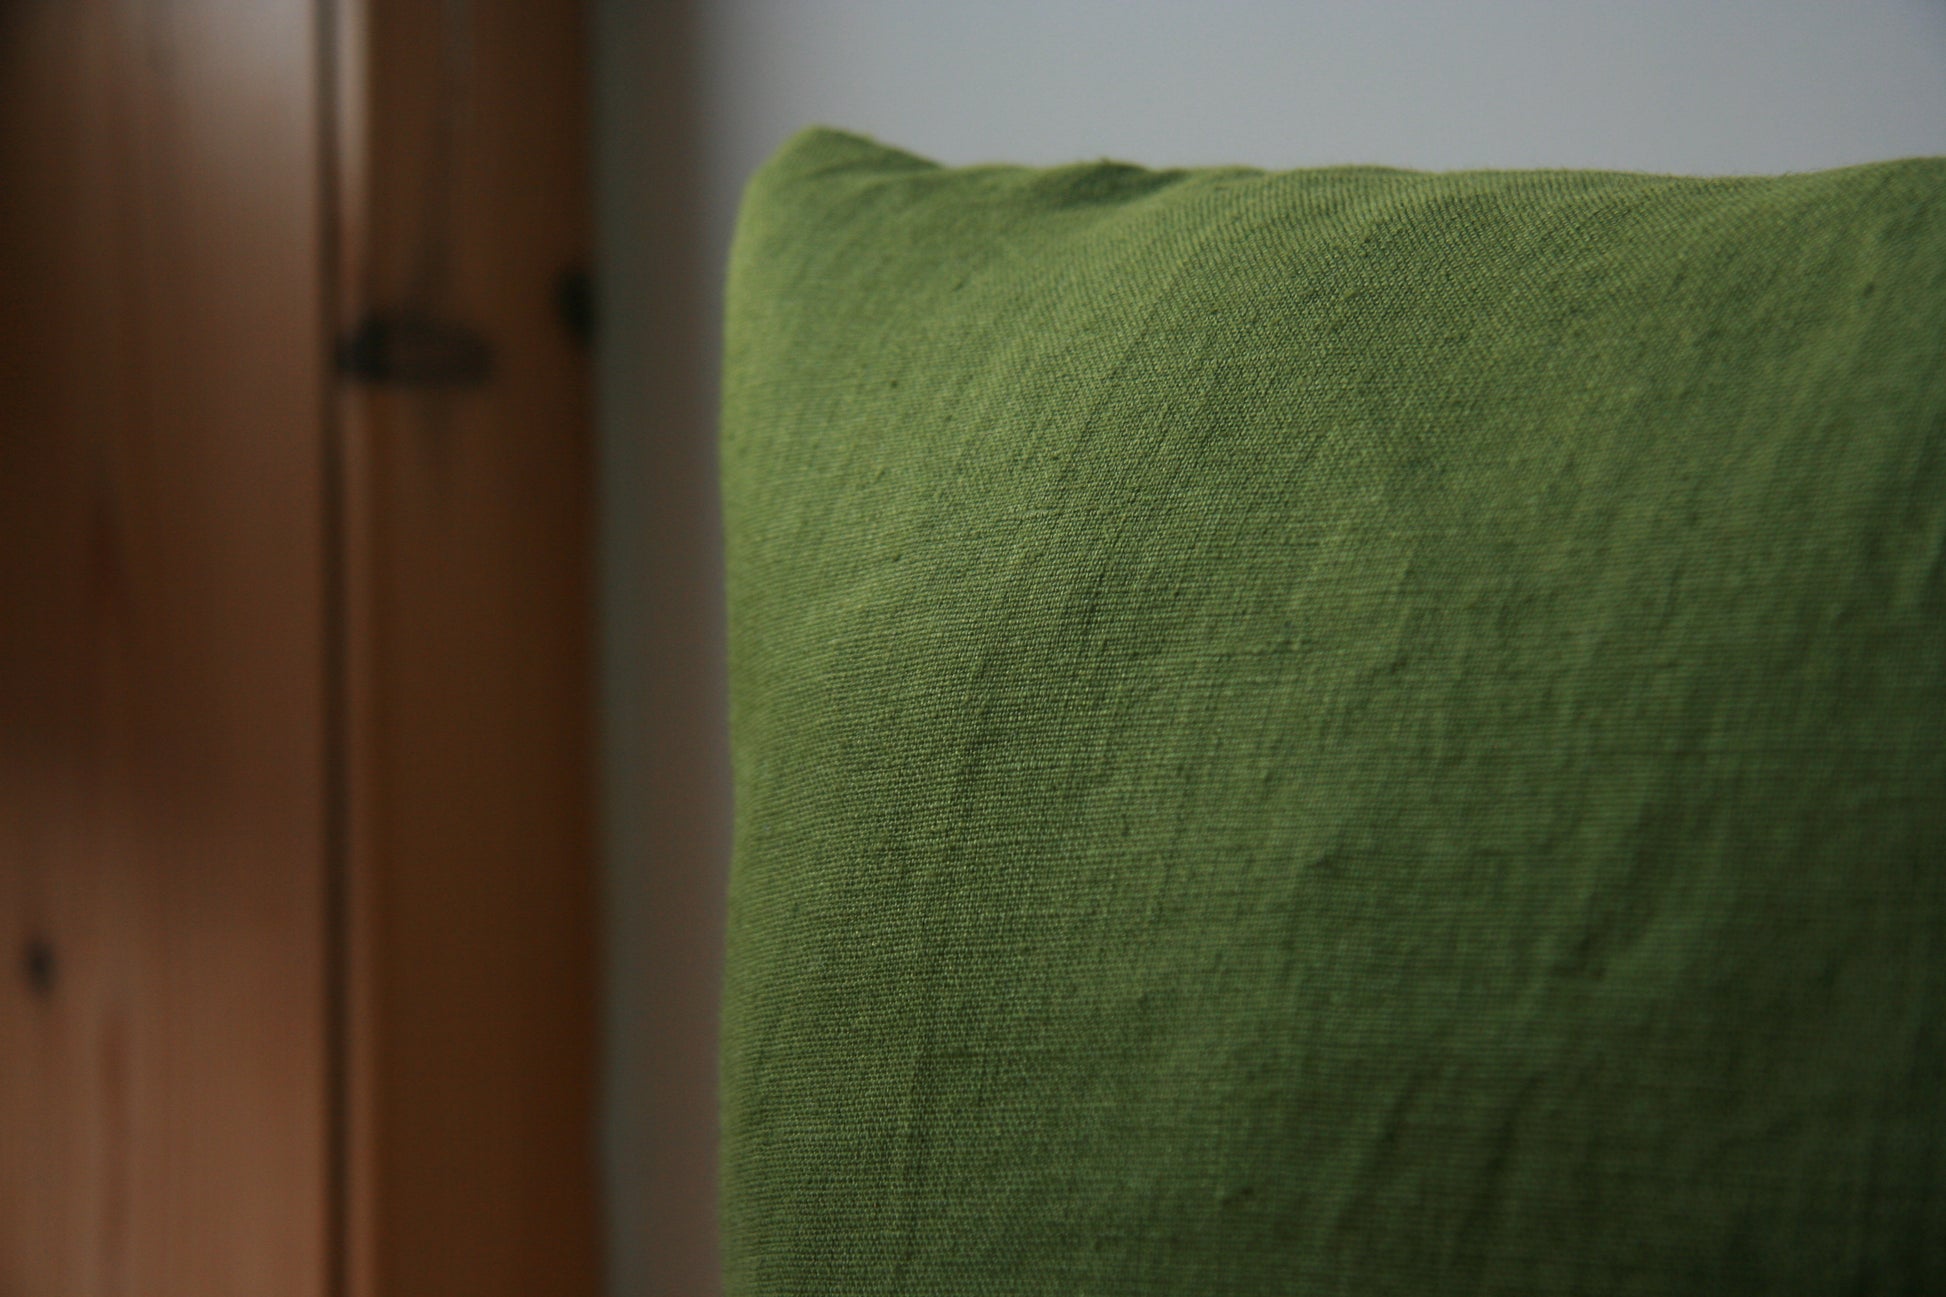 Close up image of corner of cushion. Green fabric visible against background of cream and wood